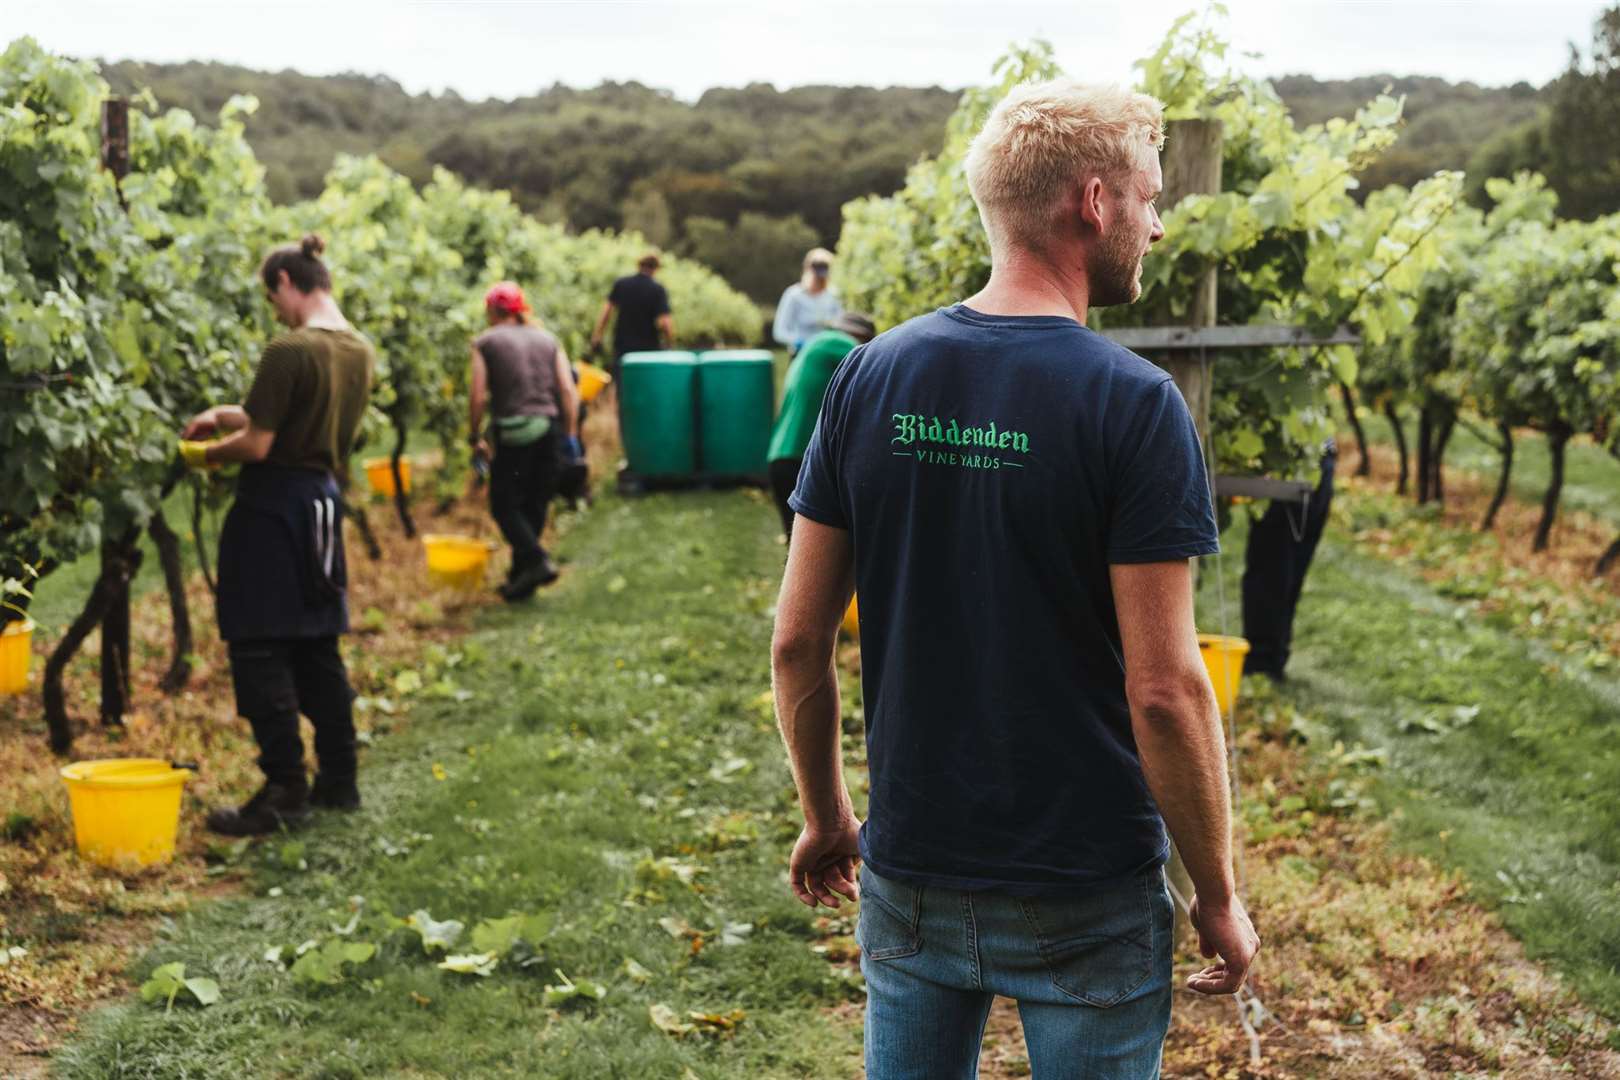 Biddenden is one of the county's longest-running vineyards and still carries out all work by hand